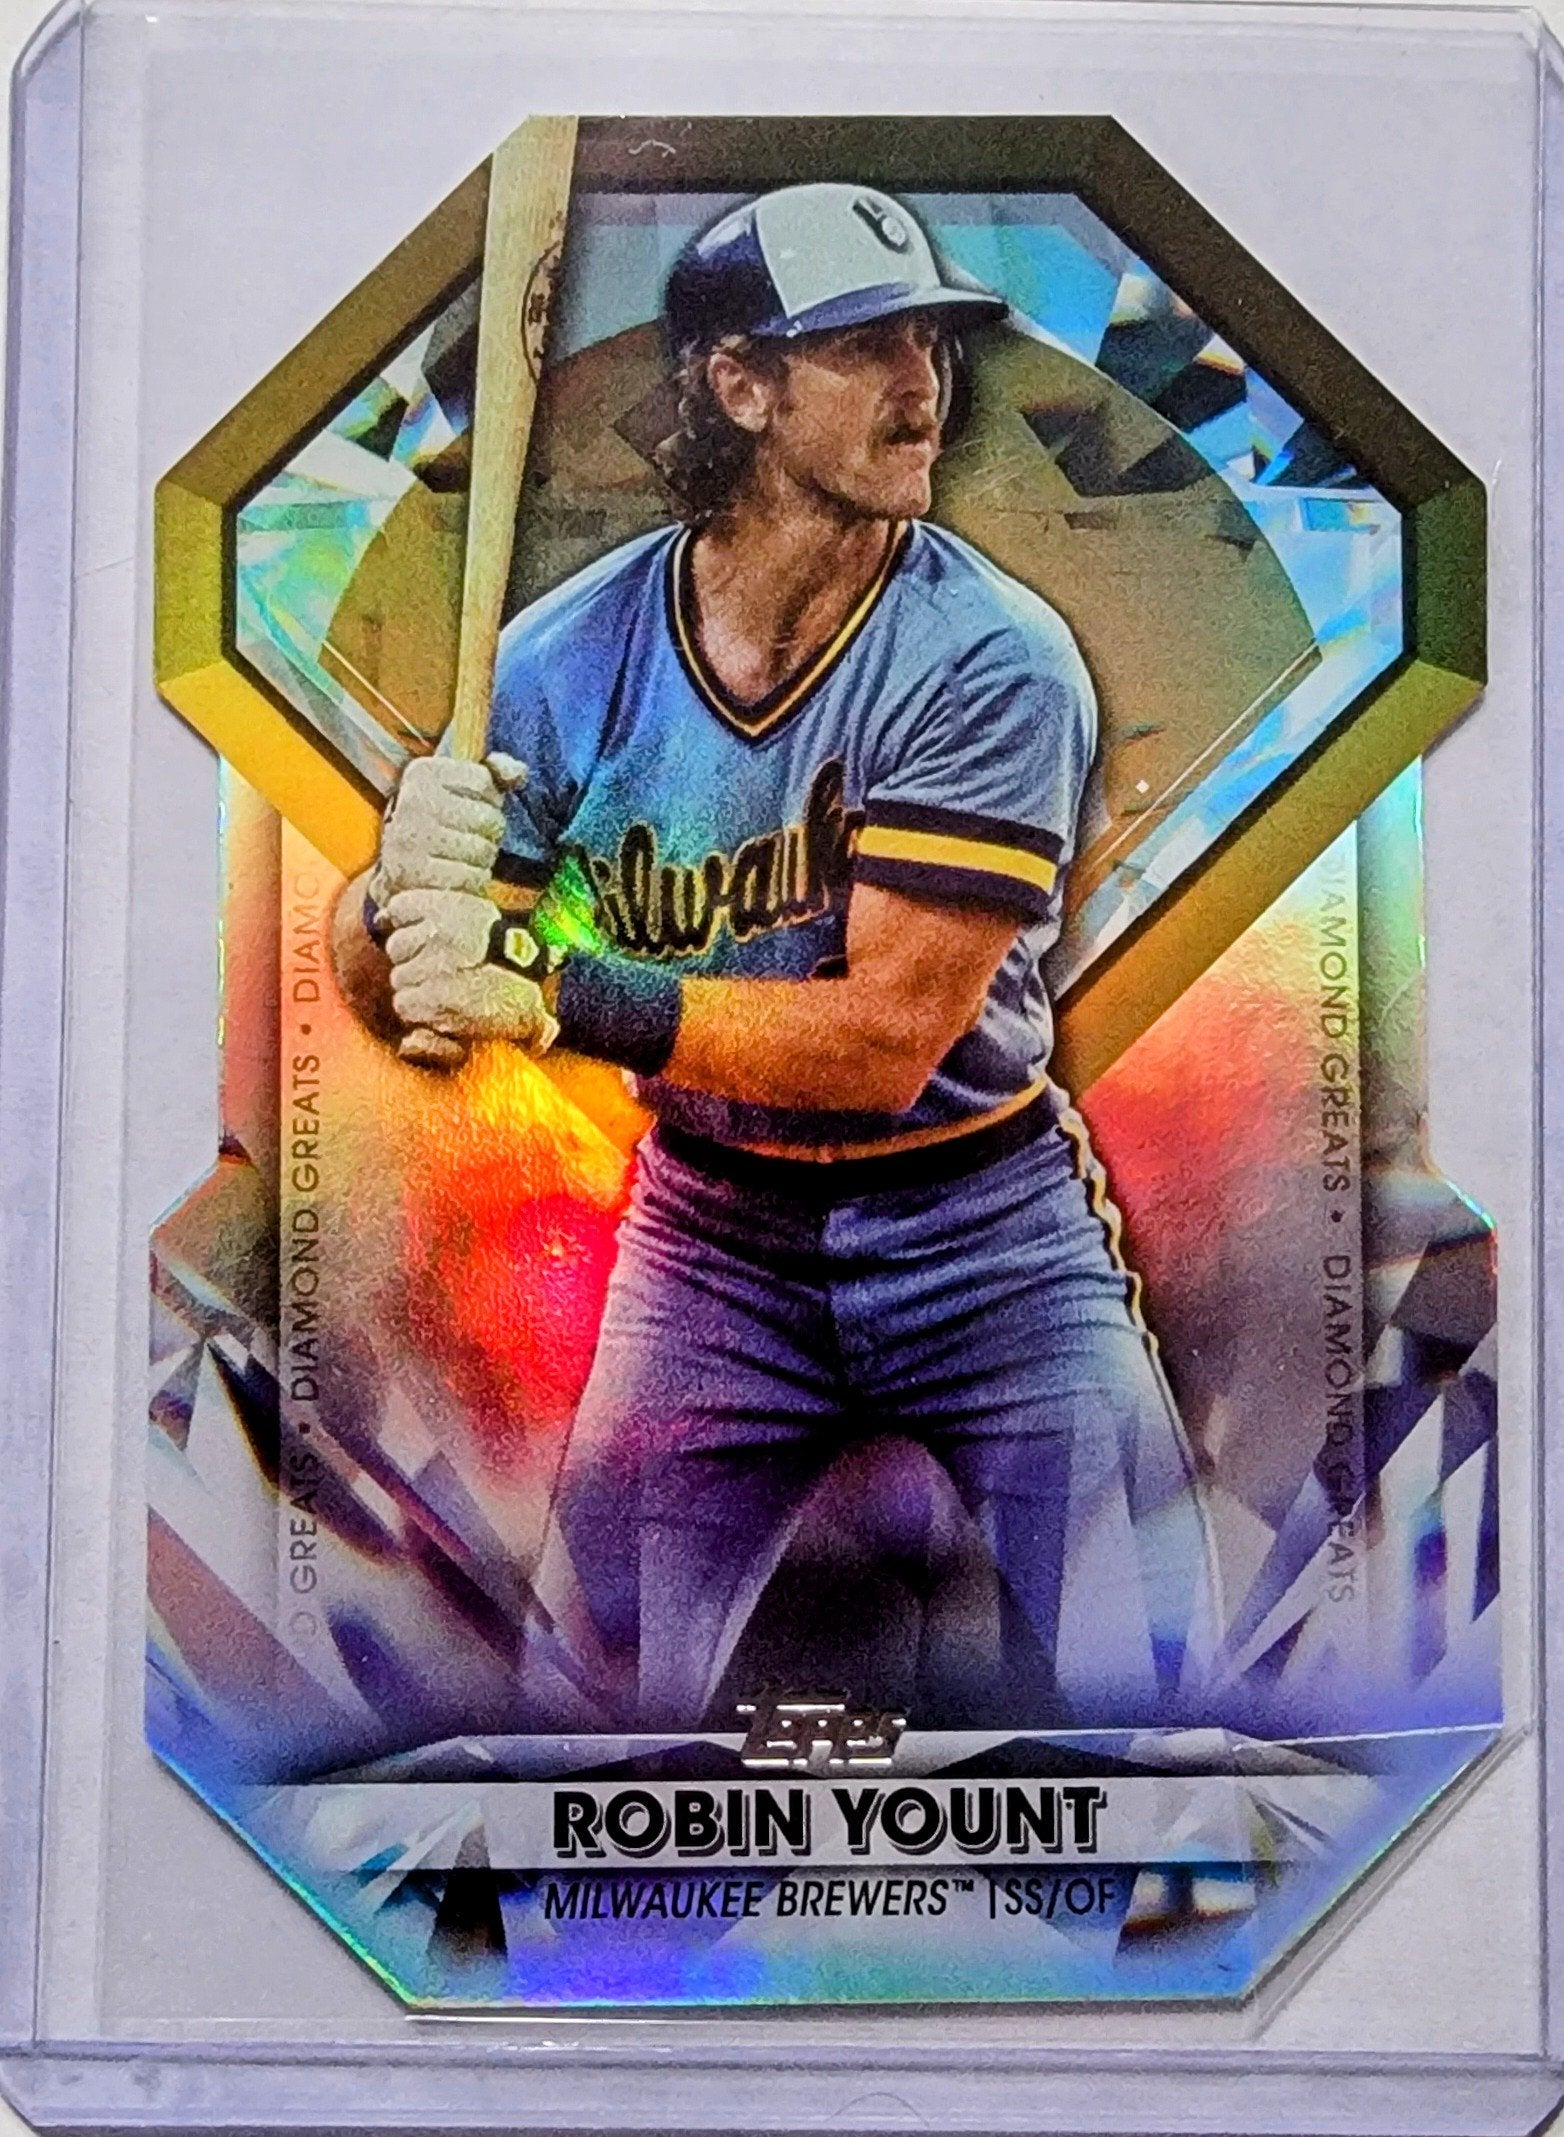 2022 Topps Series 2 Robin Yount Diamond Greats Die Cut Insert Baseball Card AVM1 simple Xclusive Collectibles   